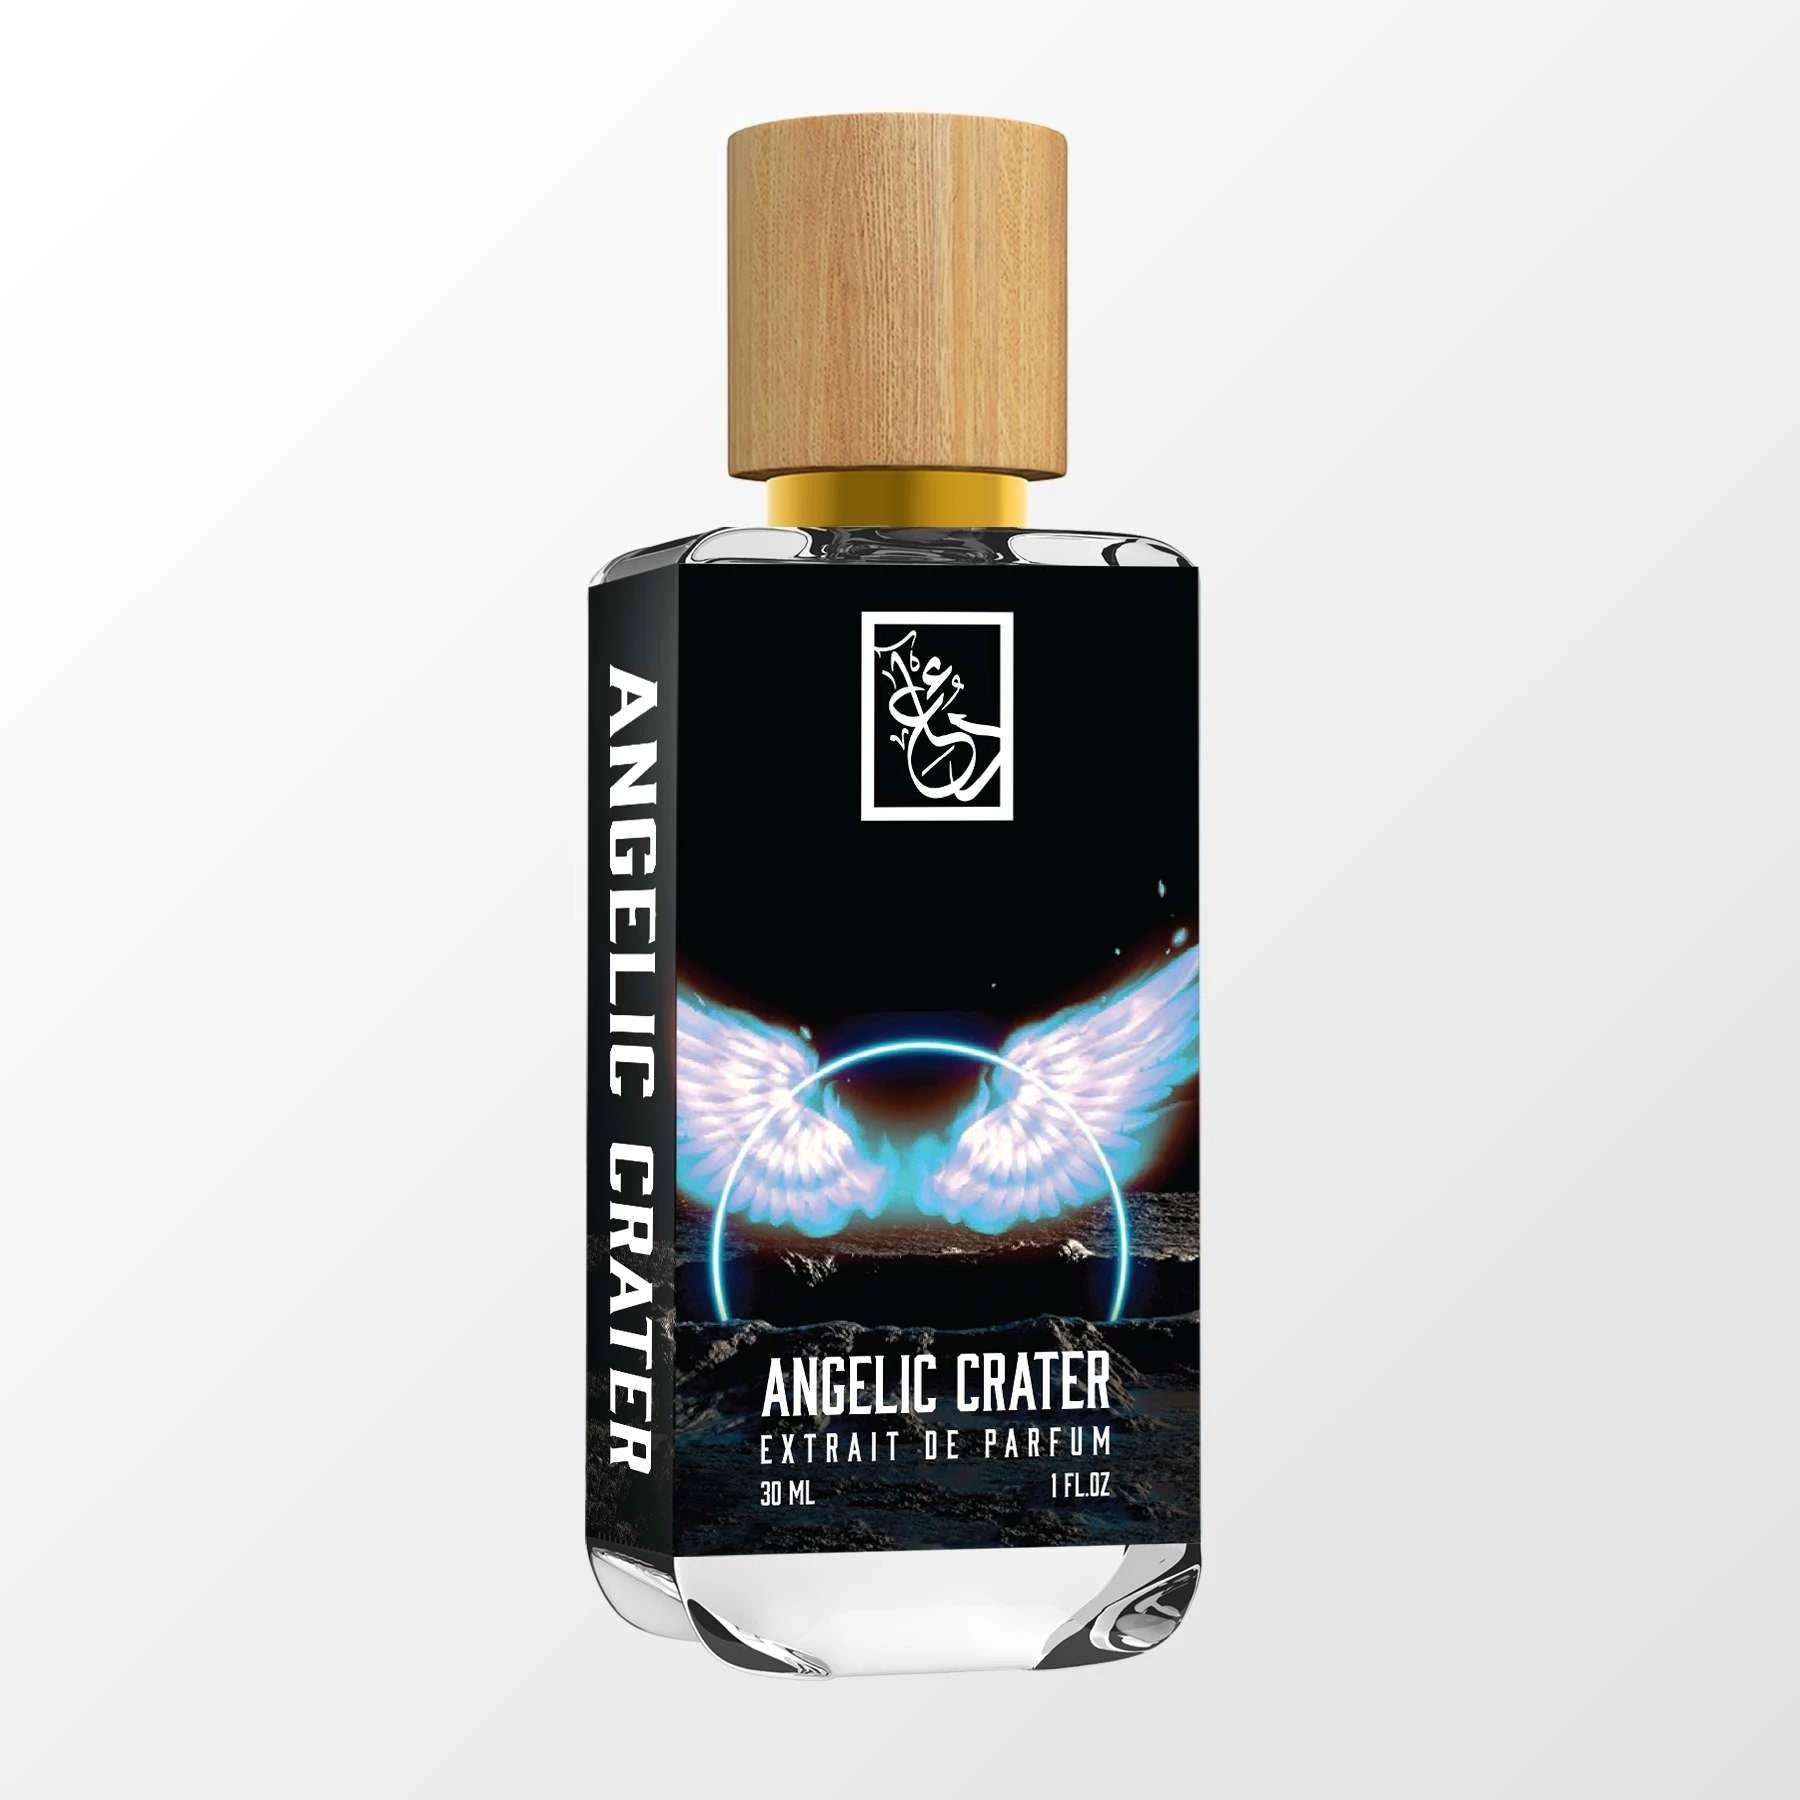 angelic-crater-tilted